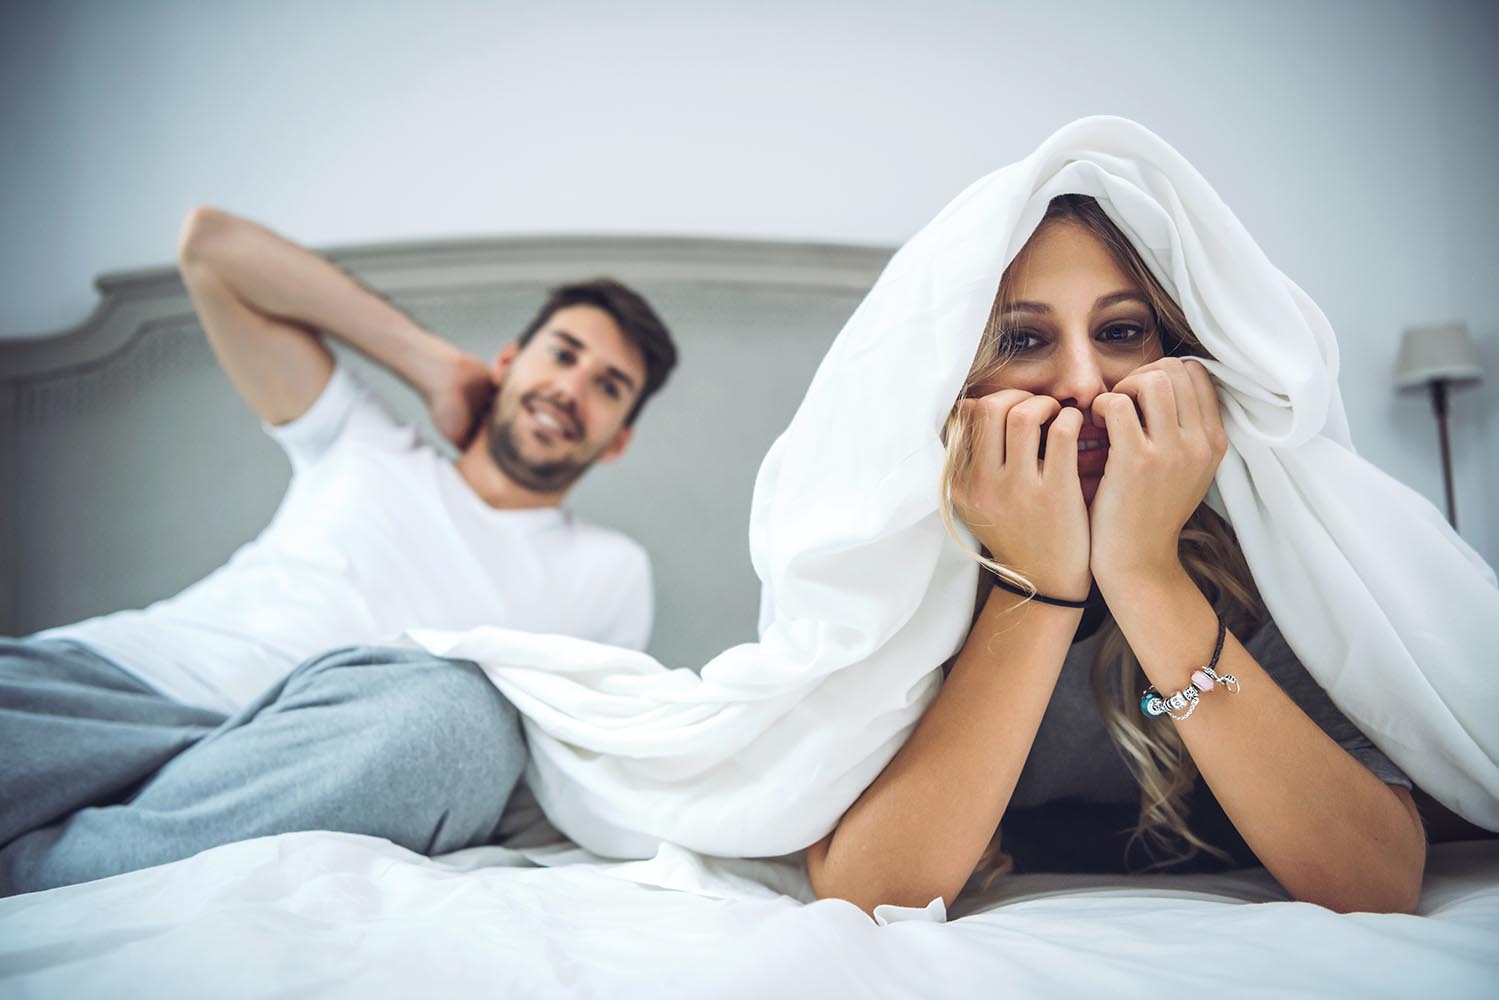 Couple enjoying time in bed